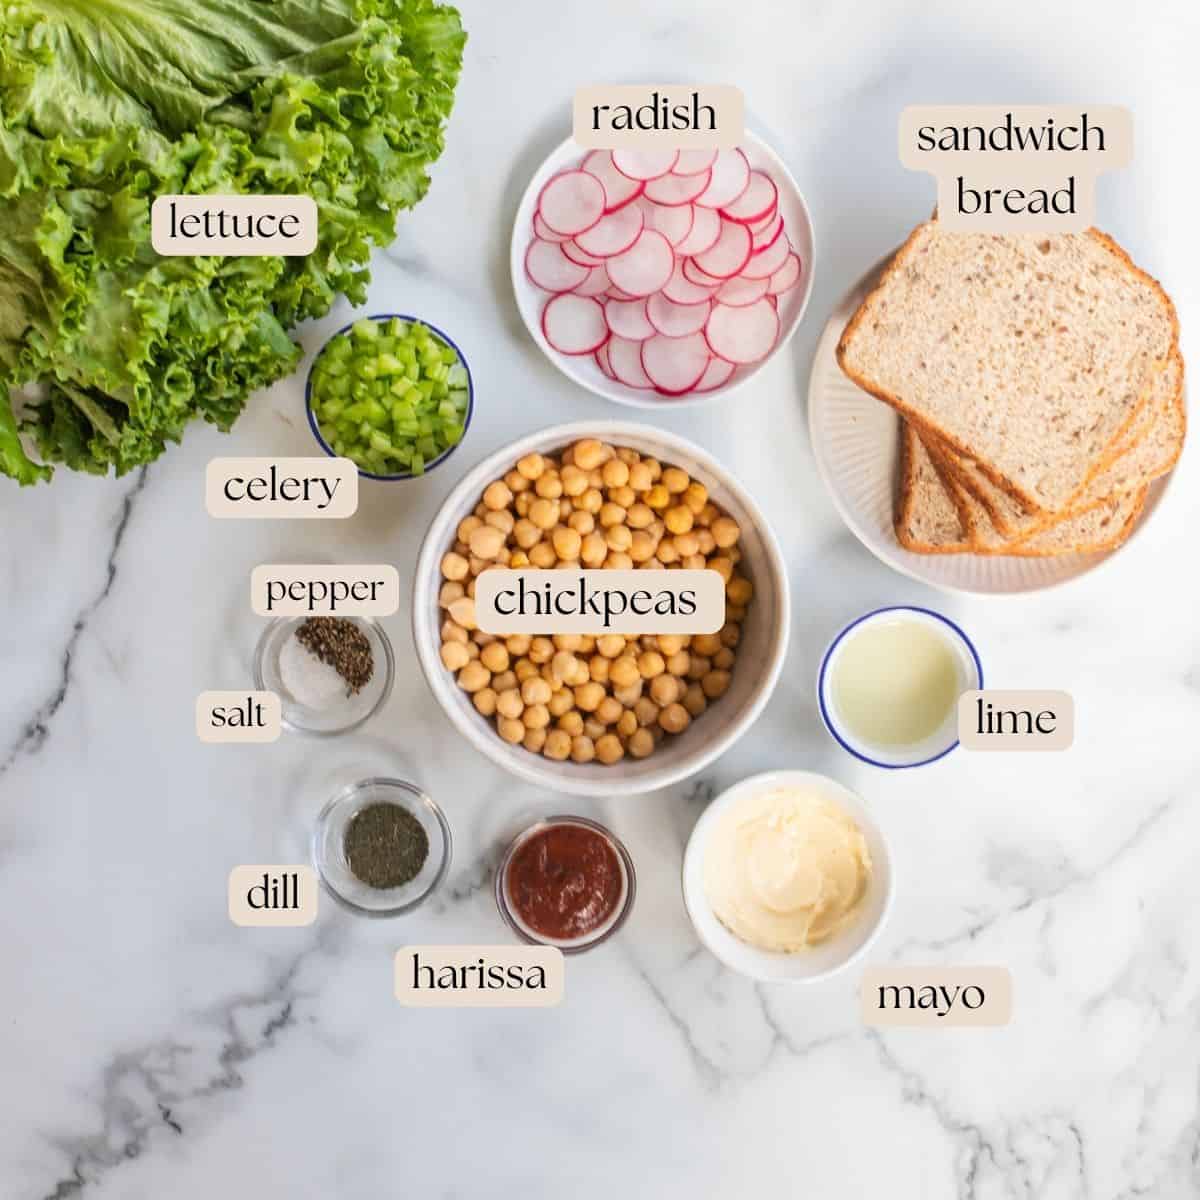 Ingredients to make smashed chickpea sandwich in bowls, plates and pinch bowls, including harissa.